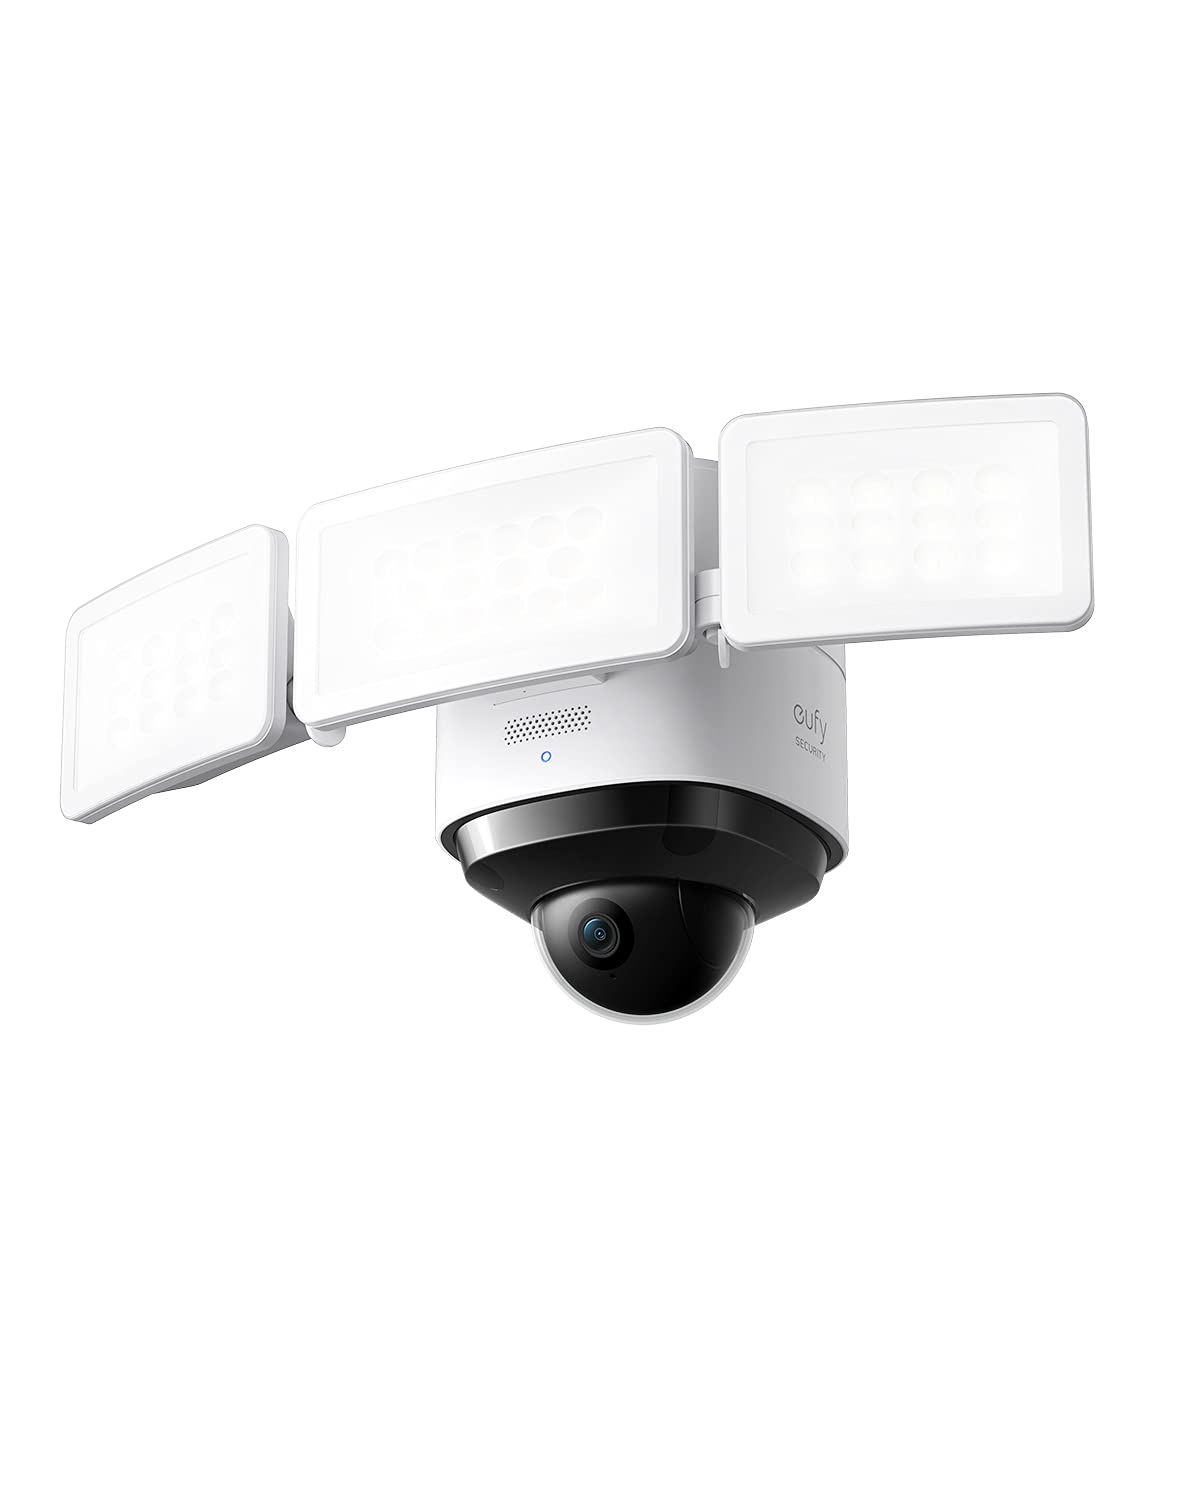 eufy Security Floodlight Cam S330, 360-Degree Pan and Tilt Coverage $170 + Free Shipping